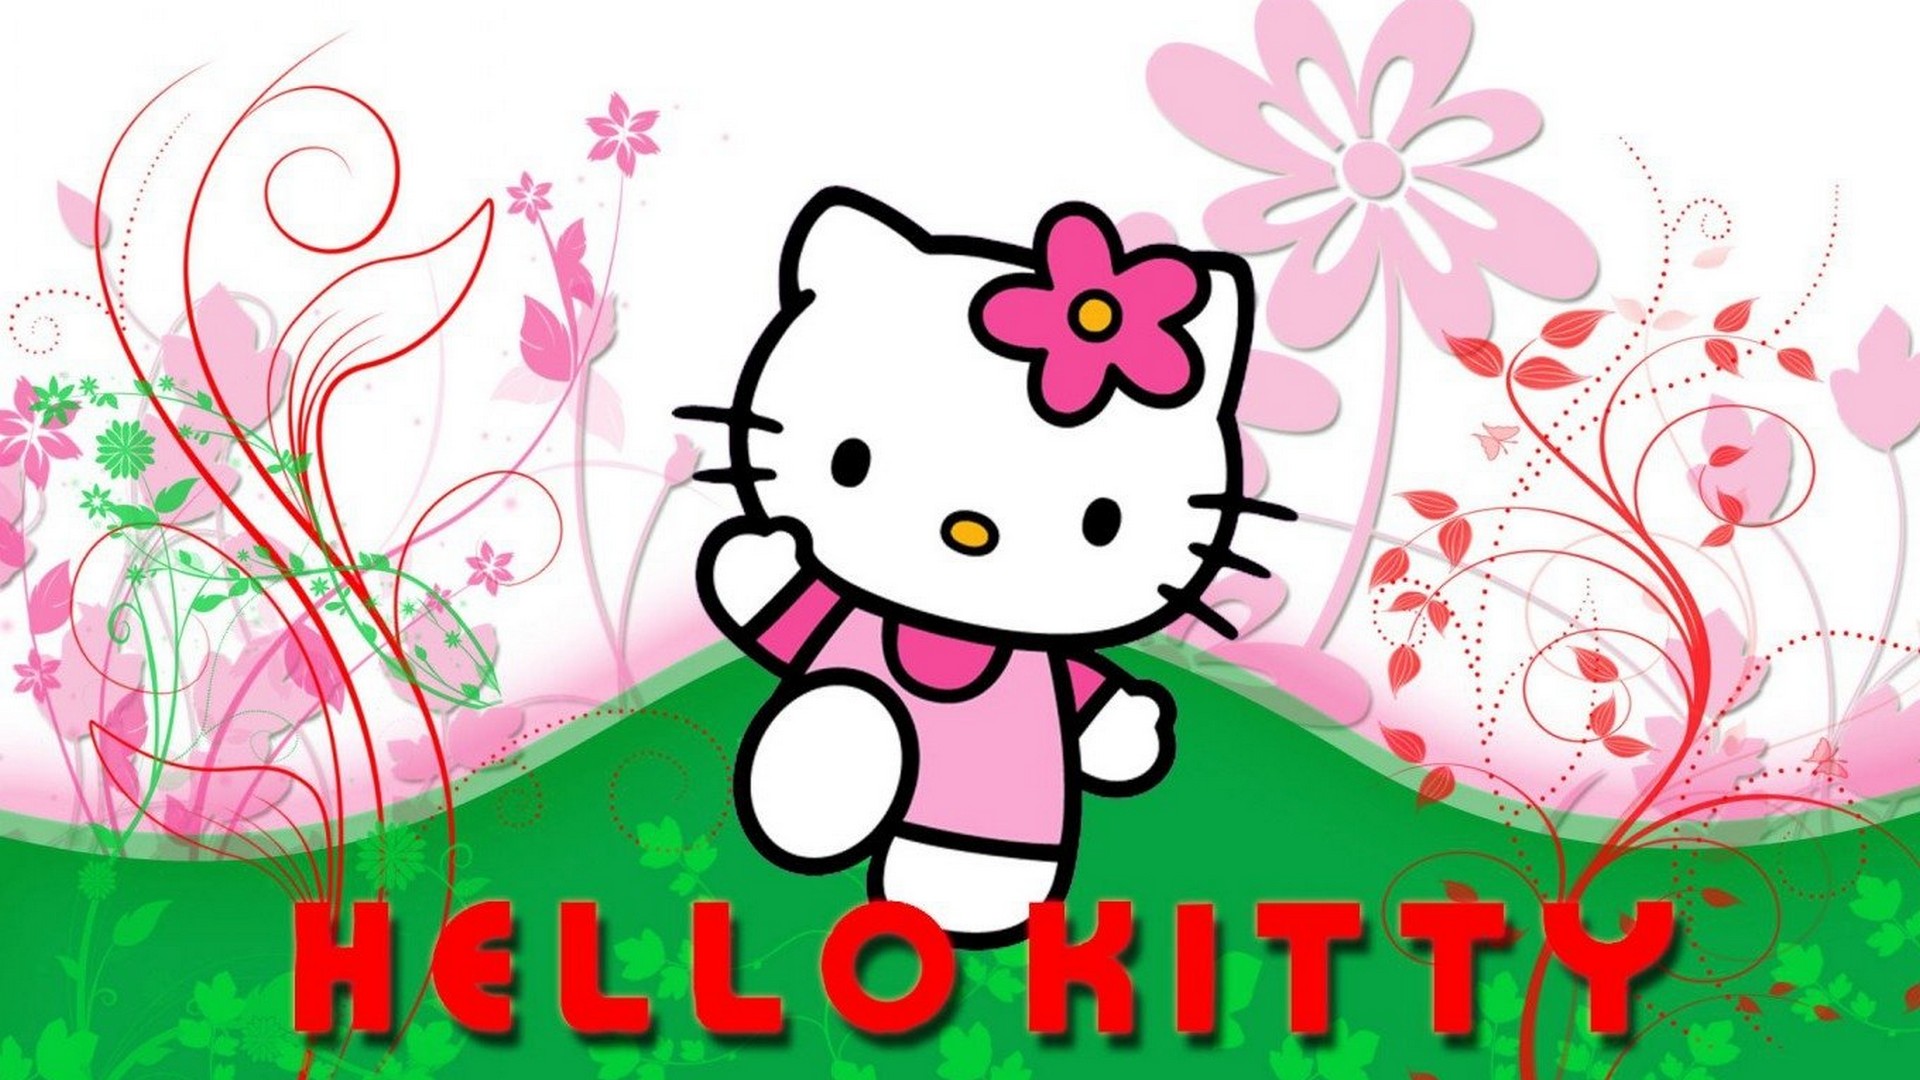 Wallpaper Hello Kitty Images with resolution 1920X1080 pixel. You can use this wallpaper as background for your desktop Computer Screensavers, Android or iPhone smartphones